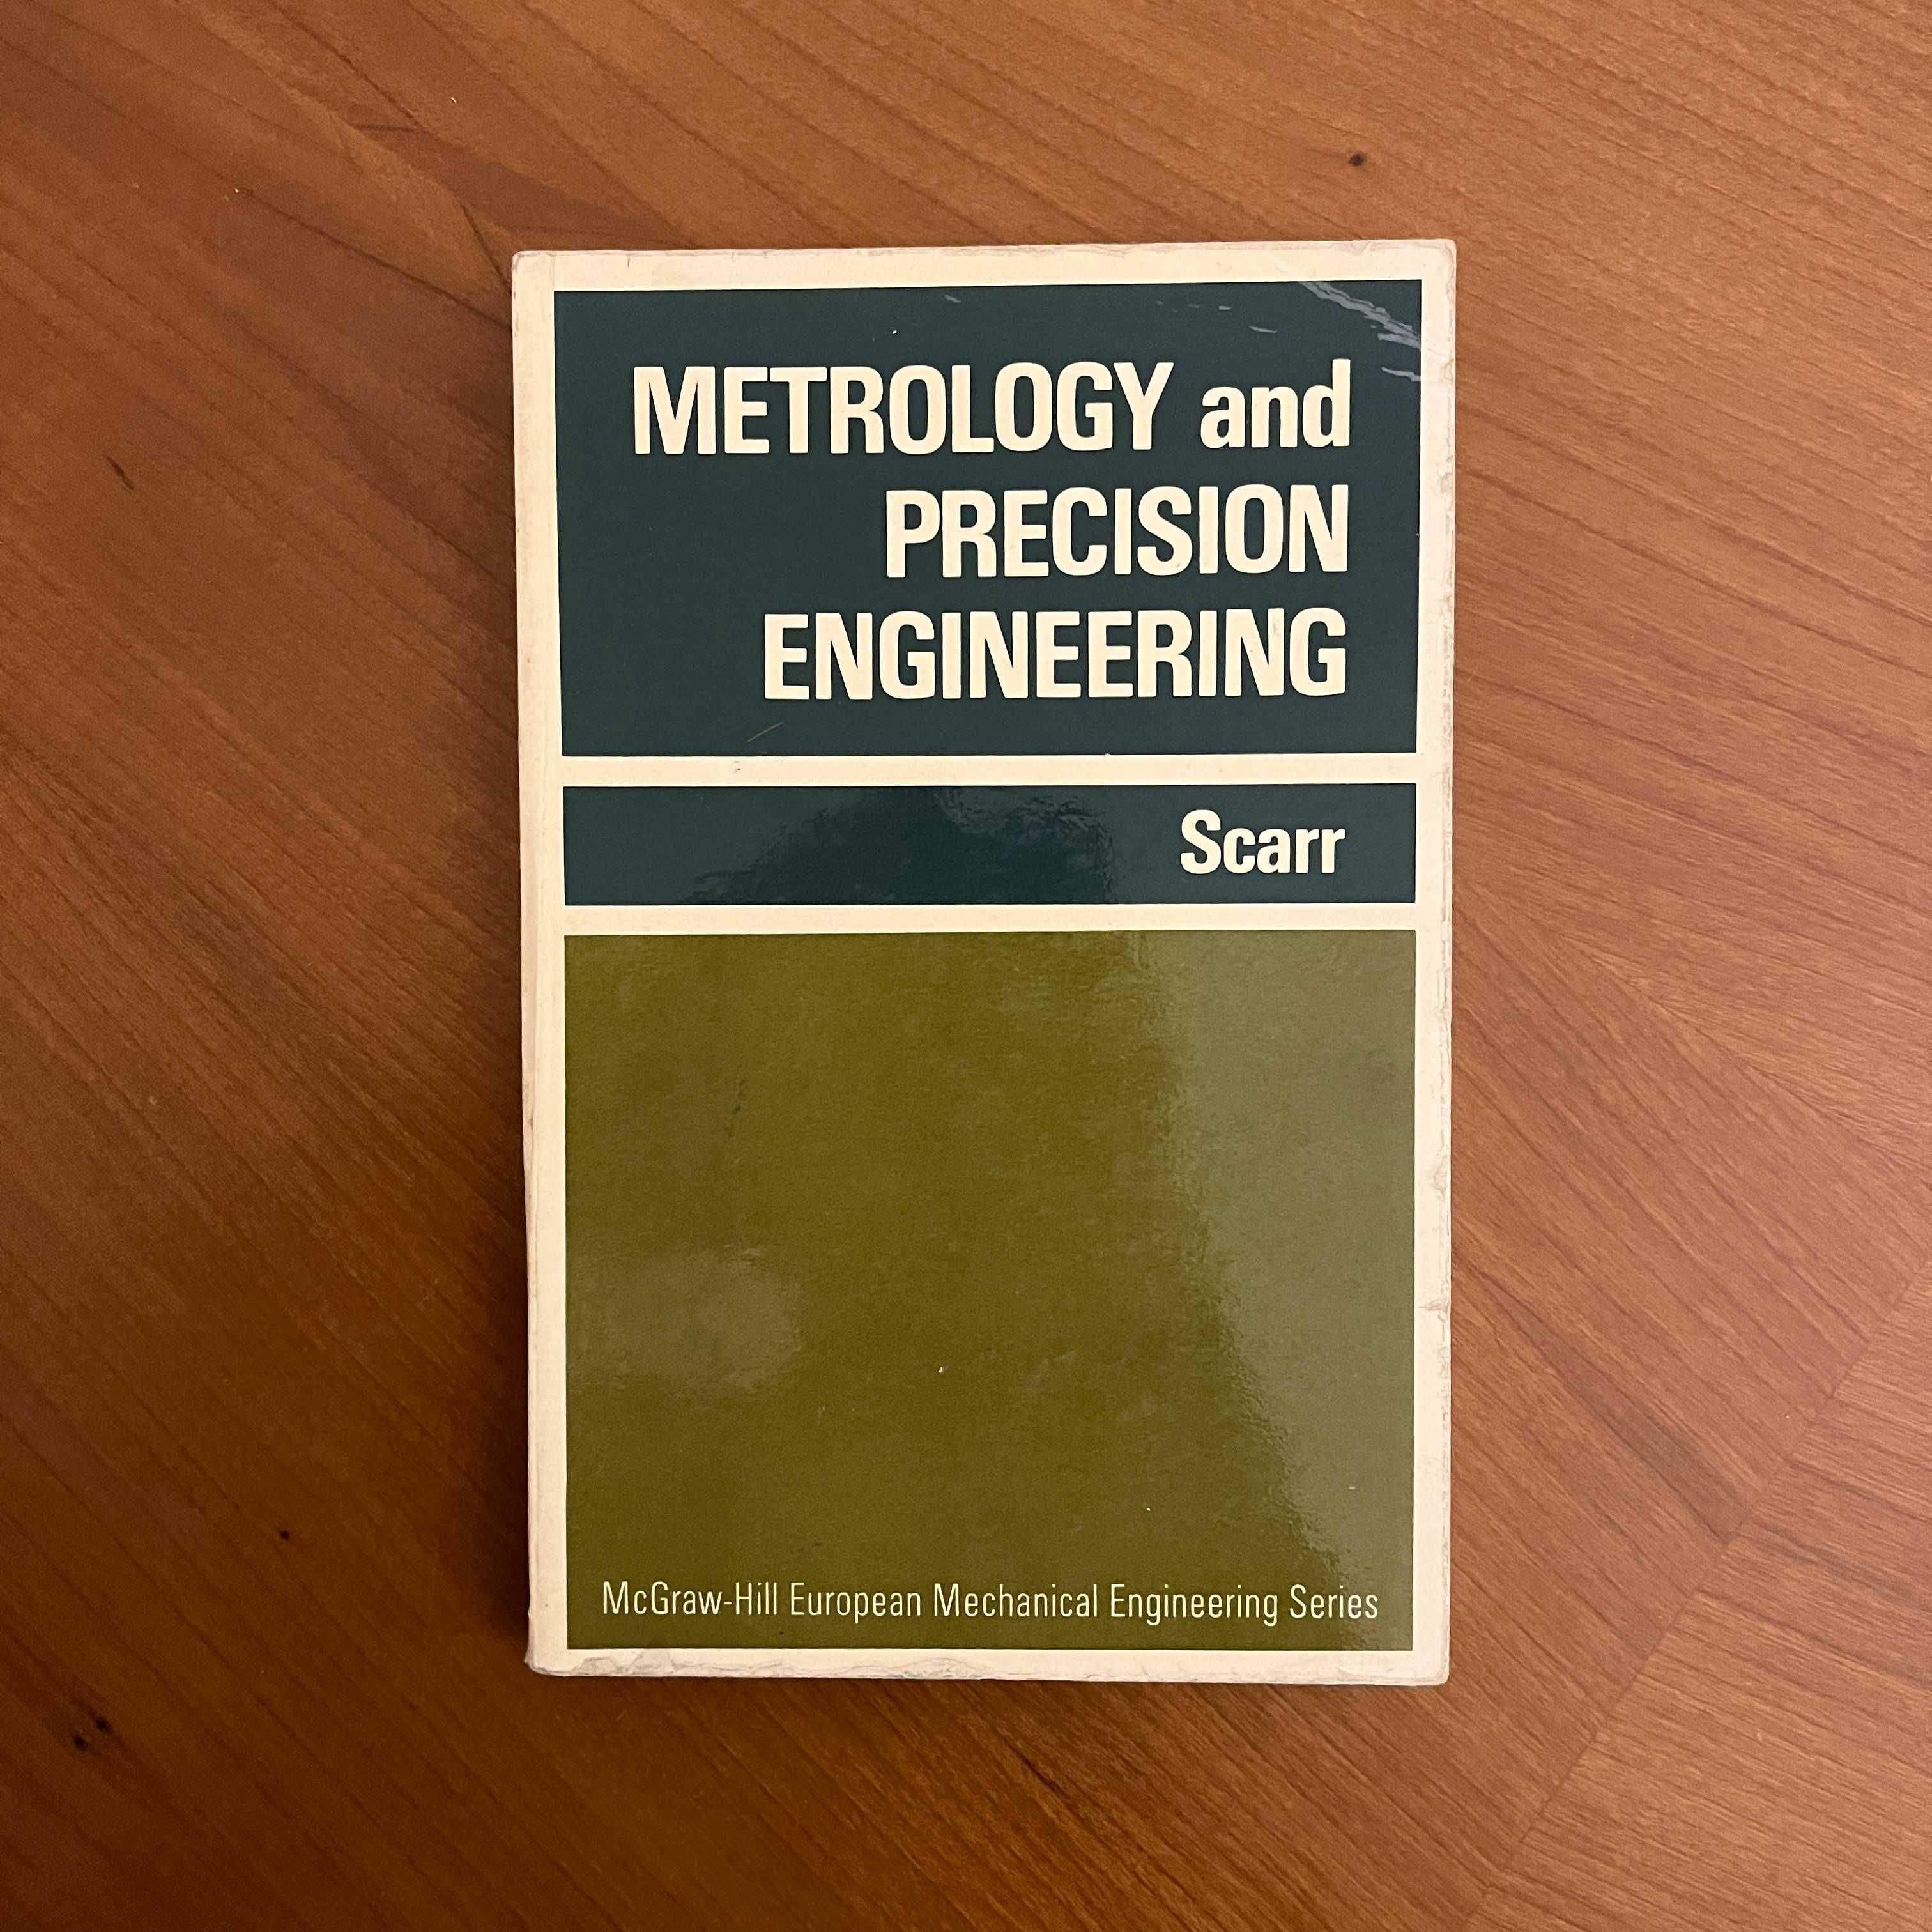 Scarr - Metrology and Precision Engineering (envio grátis)